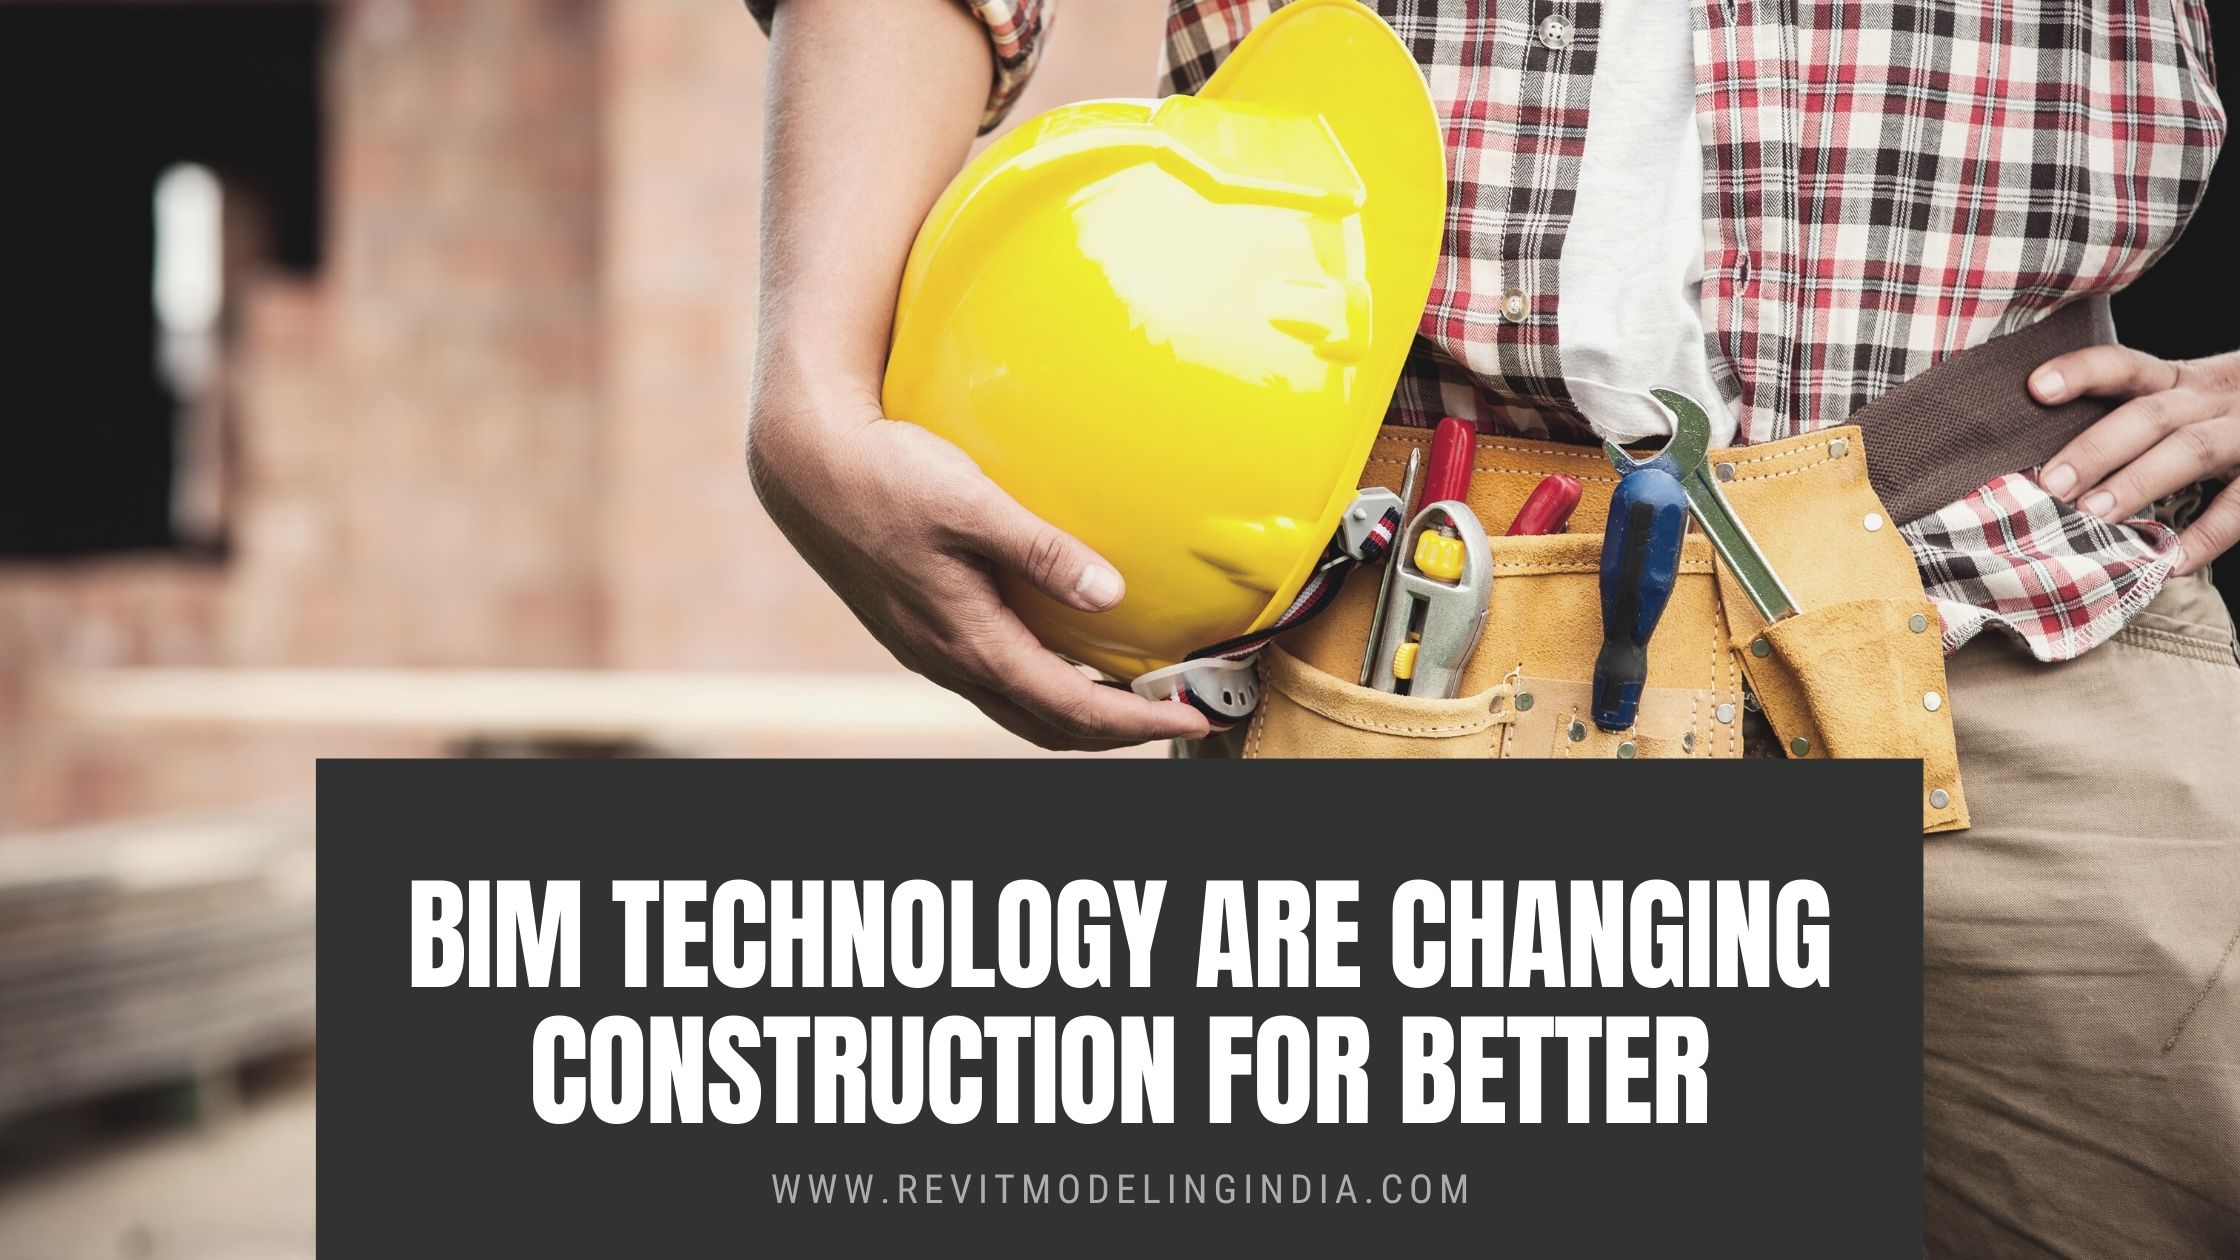 BIM Technology is changing construction for better